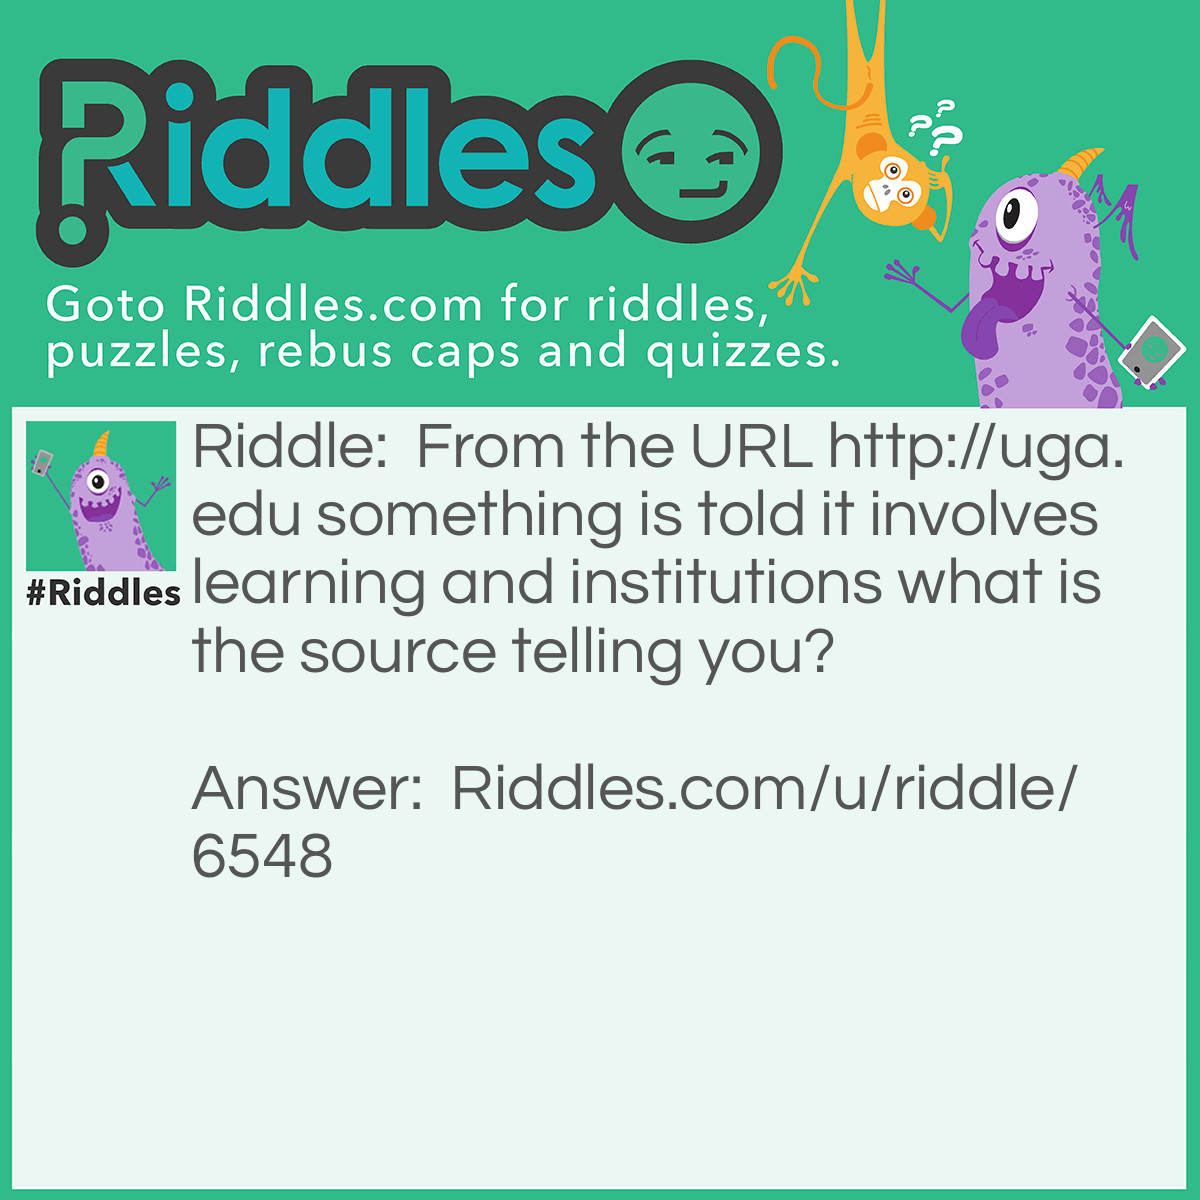 Riddle: From the URL something is told it involves learning and institutions what is the source telling you? Answer: It is associated with an educational institution.